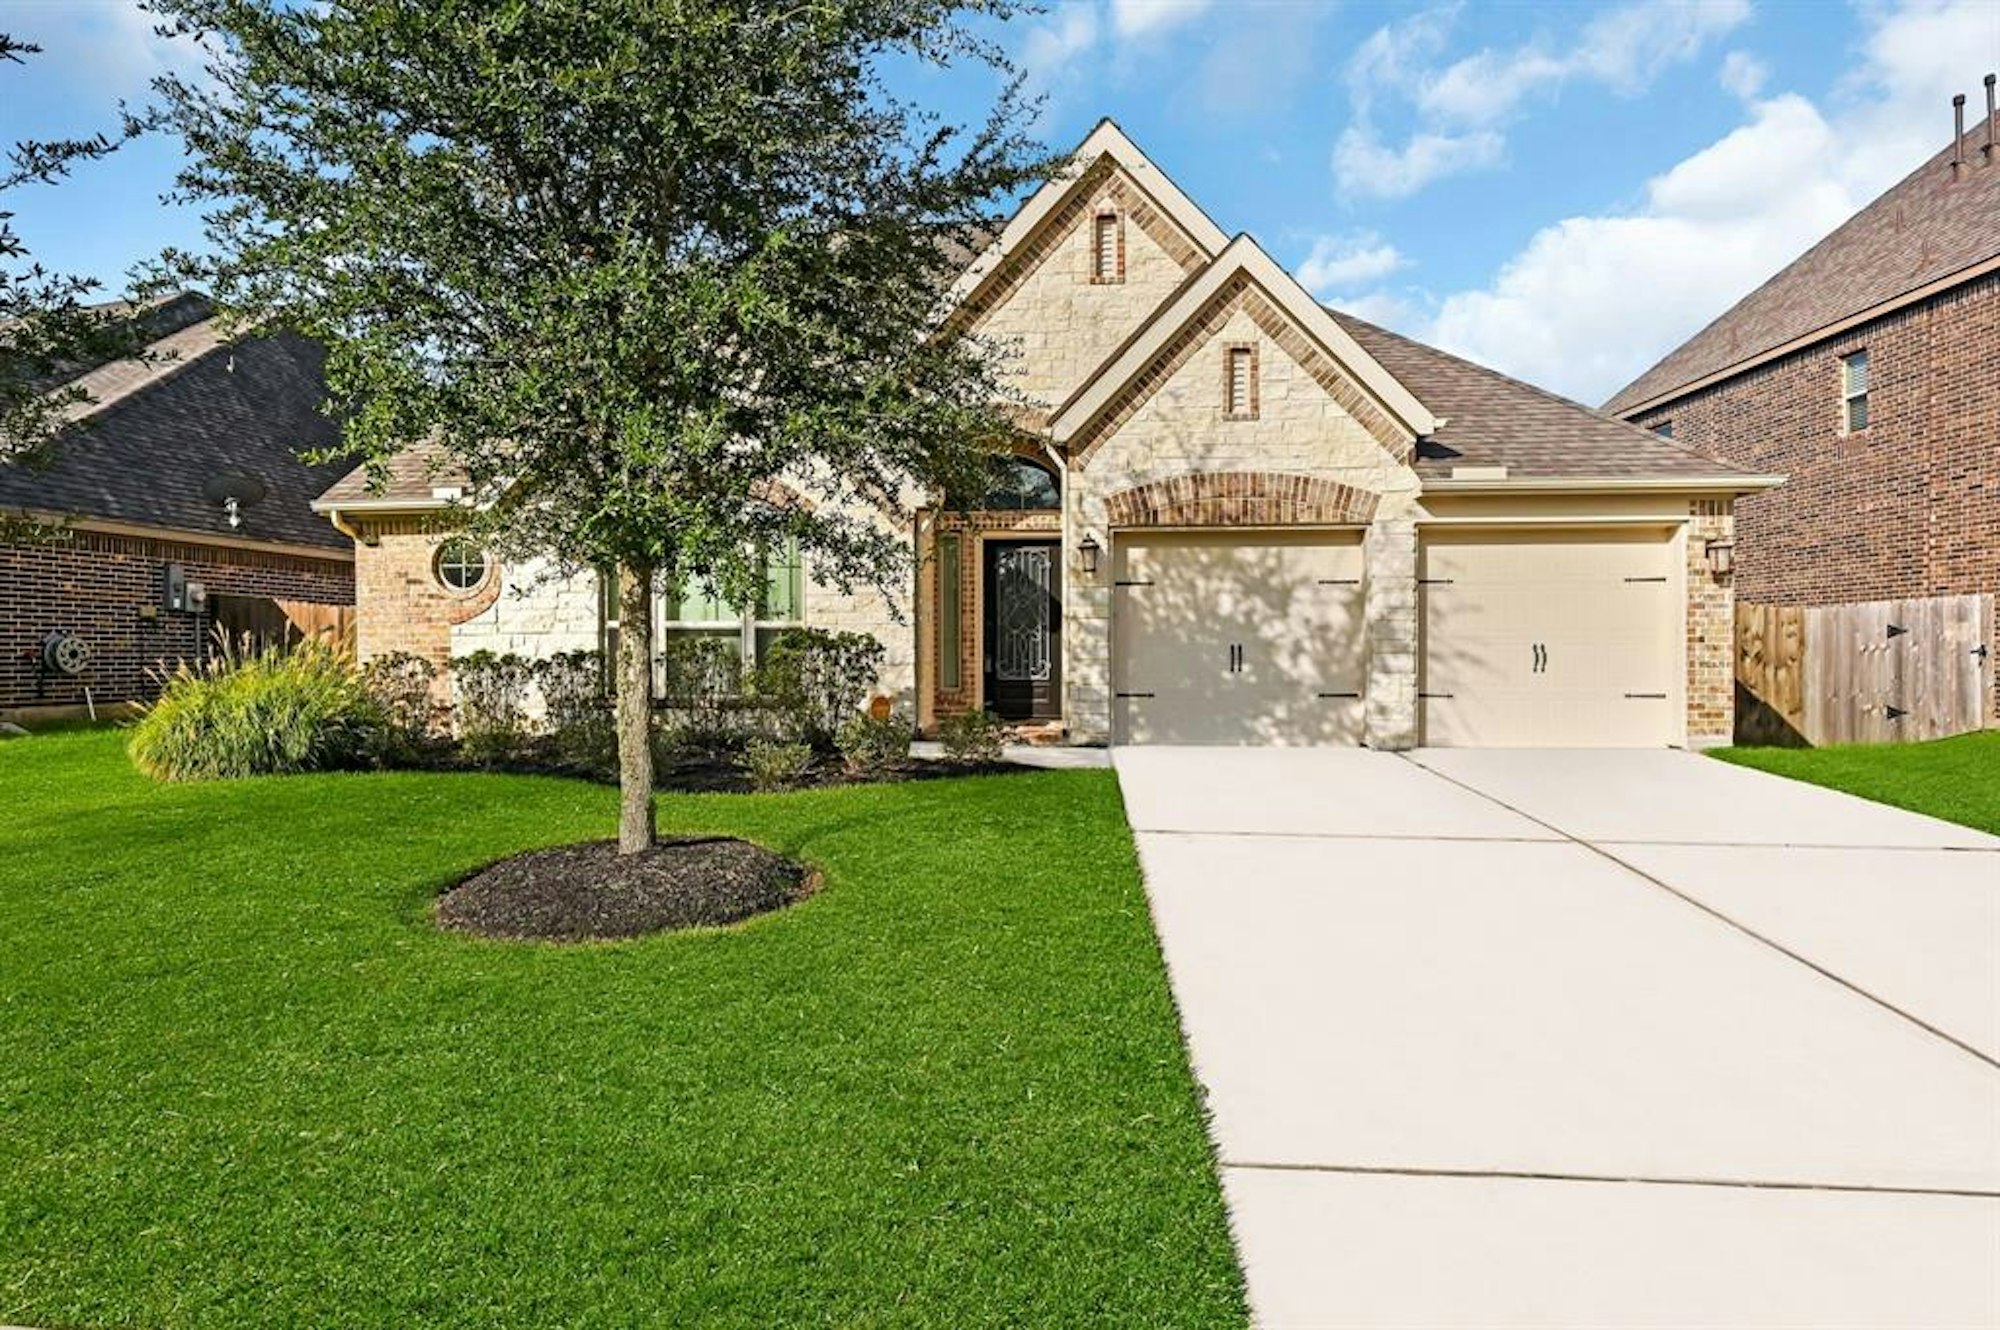 Photo 1 of 36 - 13444 Swift Creek Dr, Pearland, TX 77584